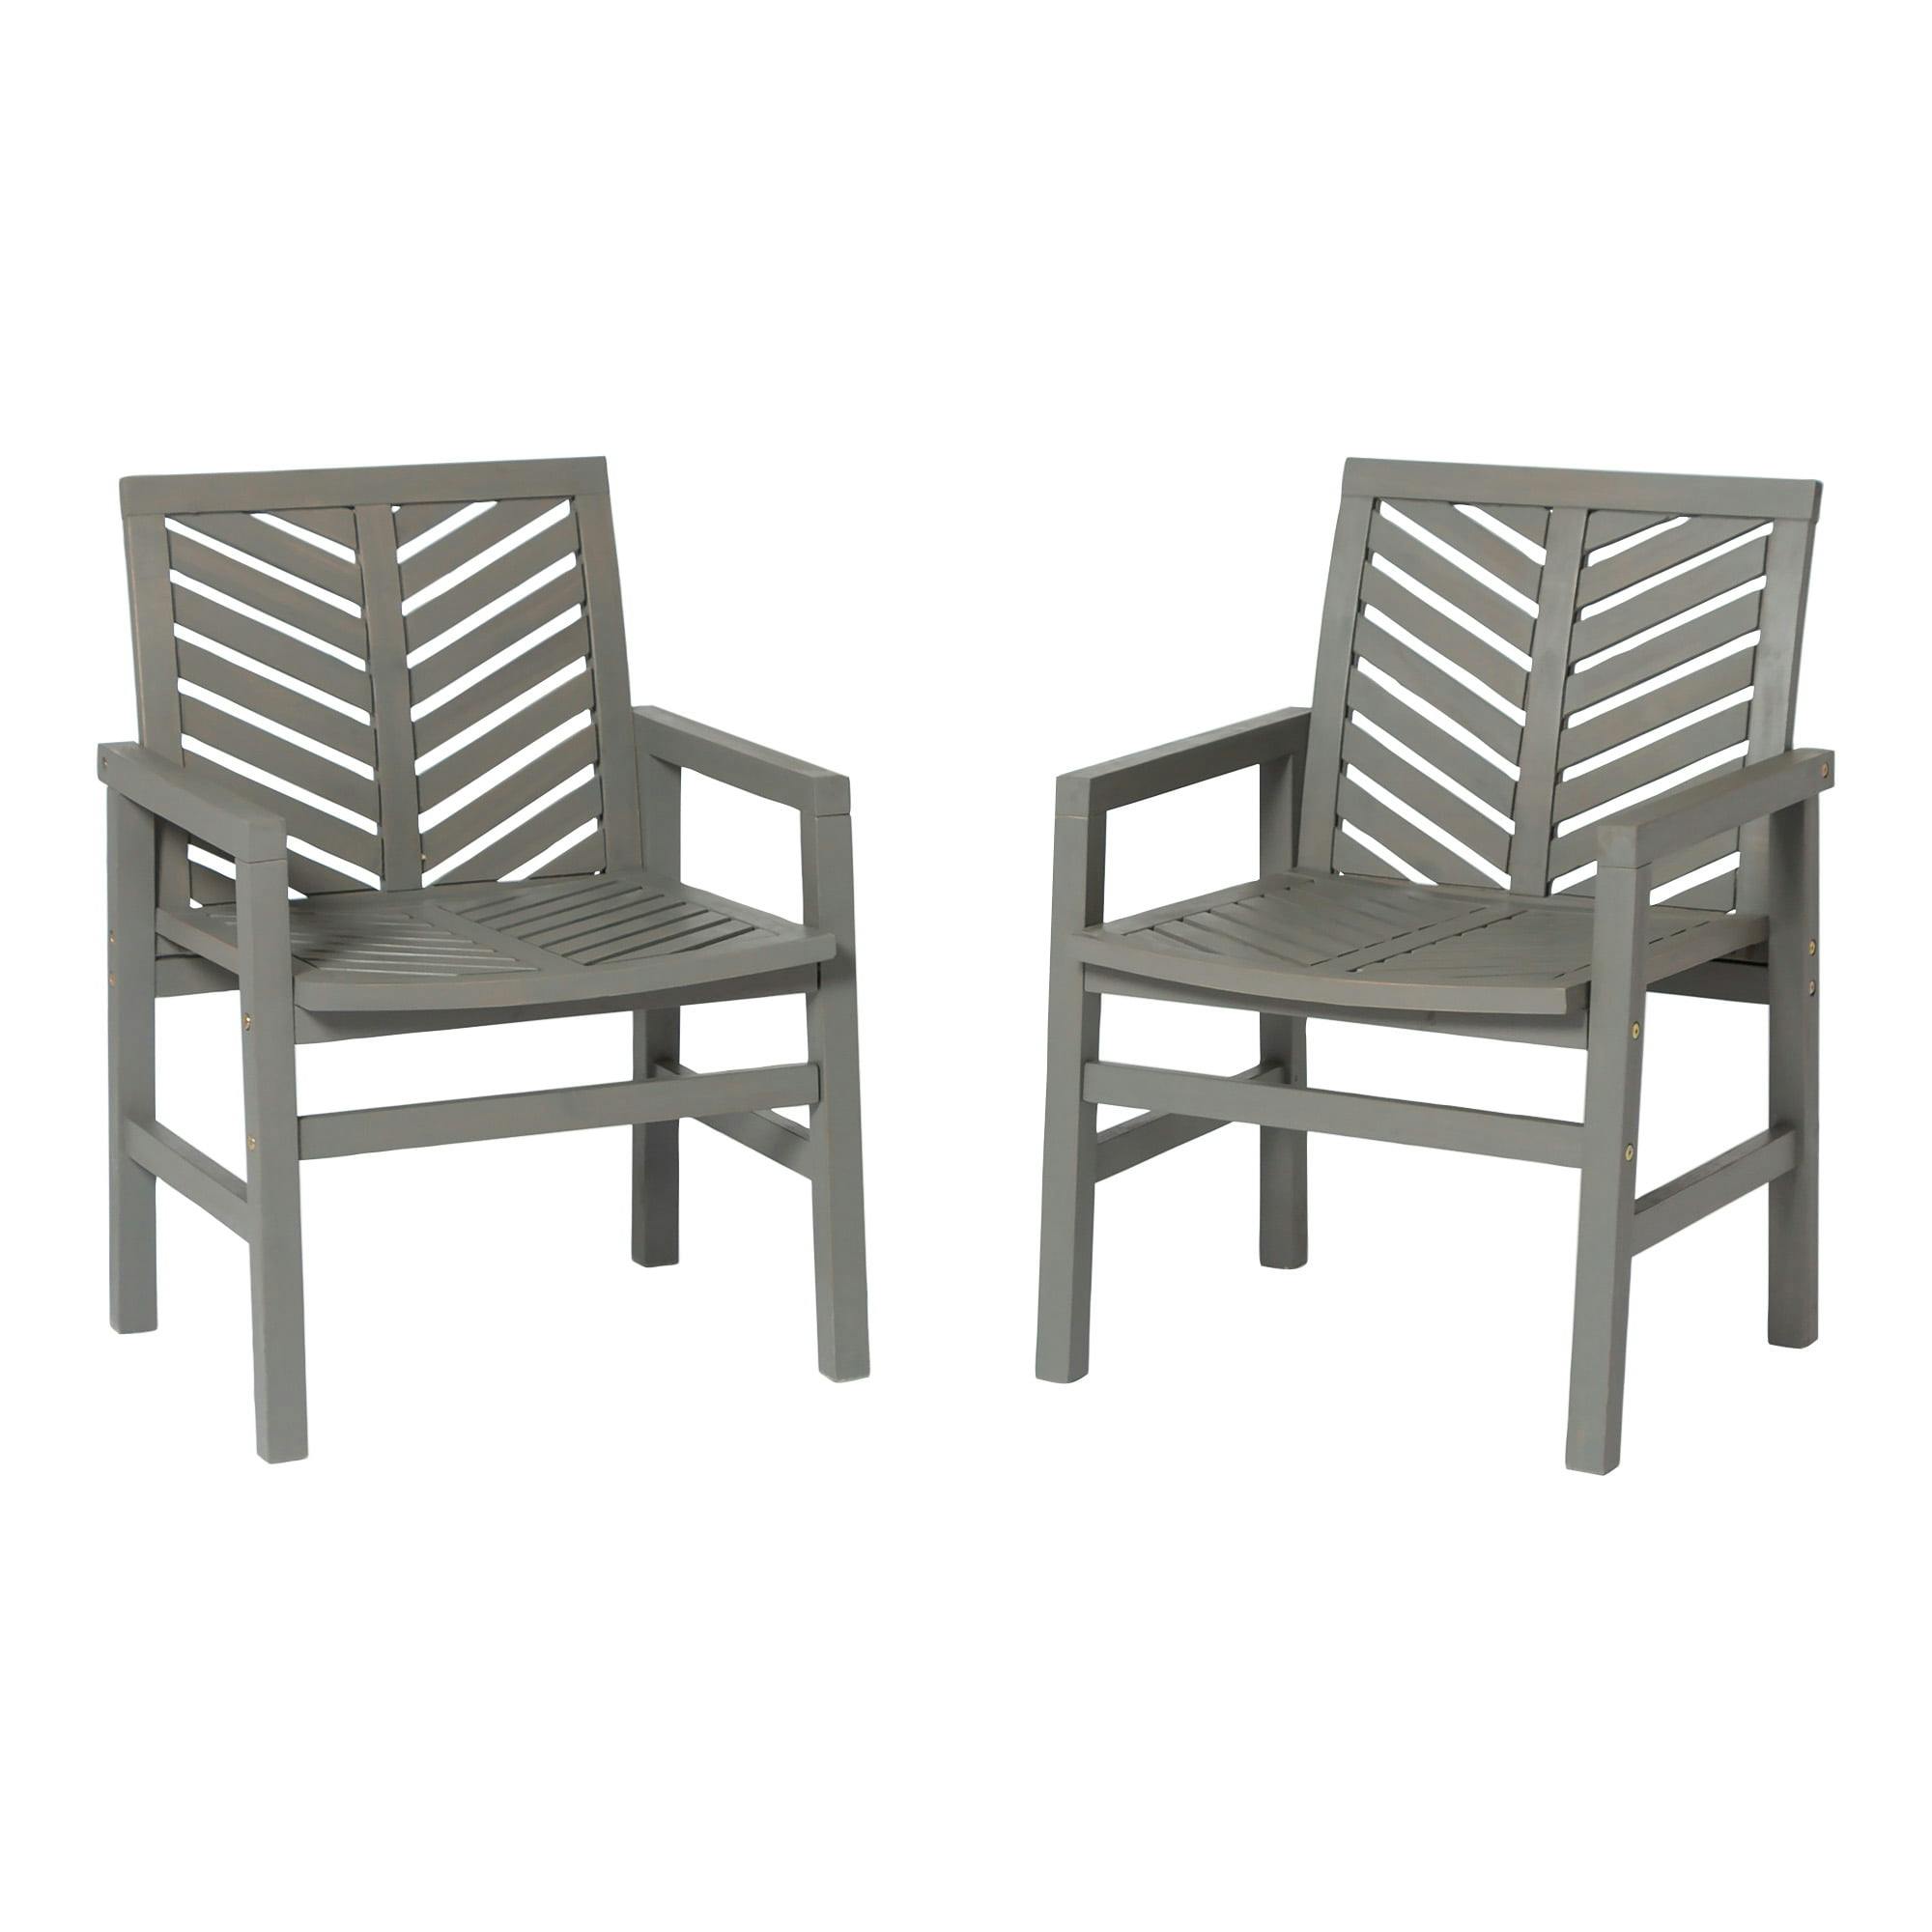 Traditional Acacia Wood Chevron Outdoor Chair Set in Gray